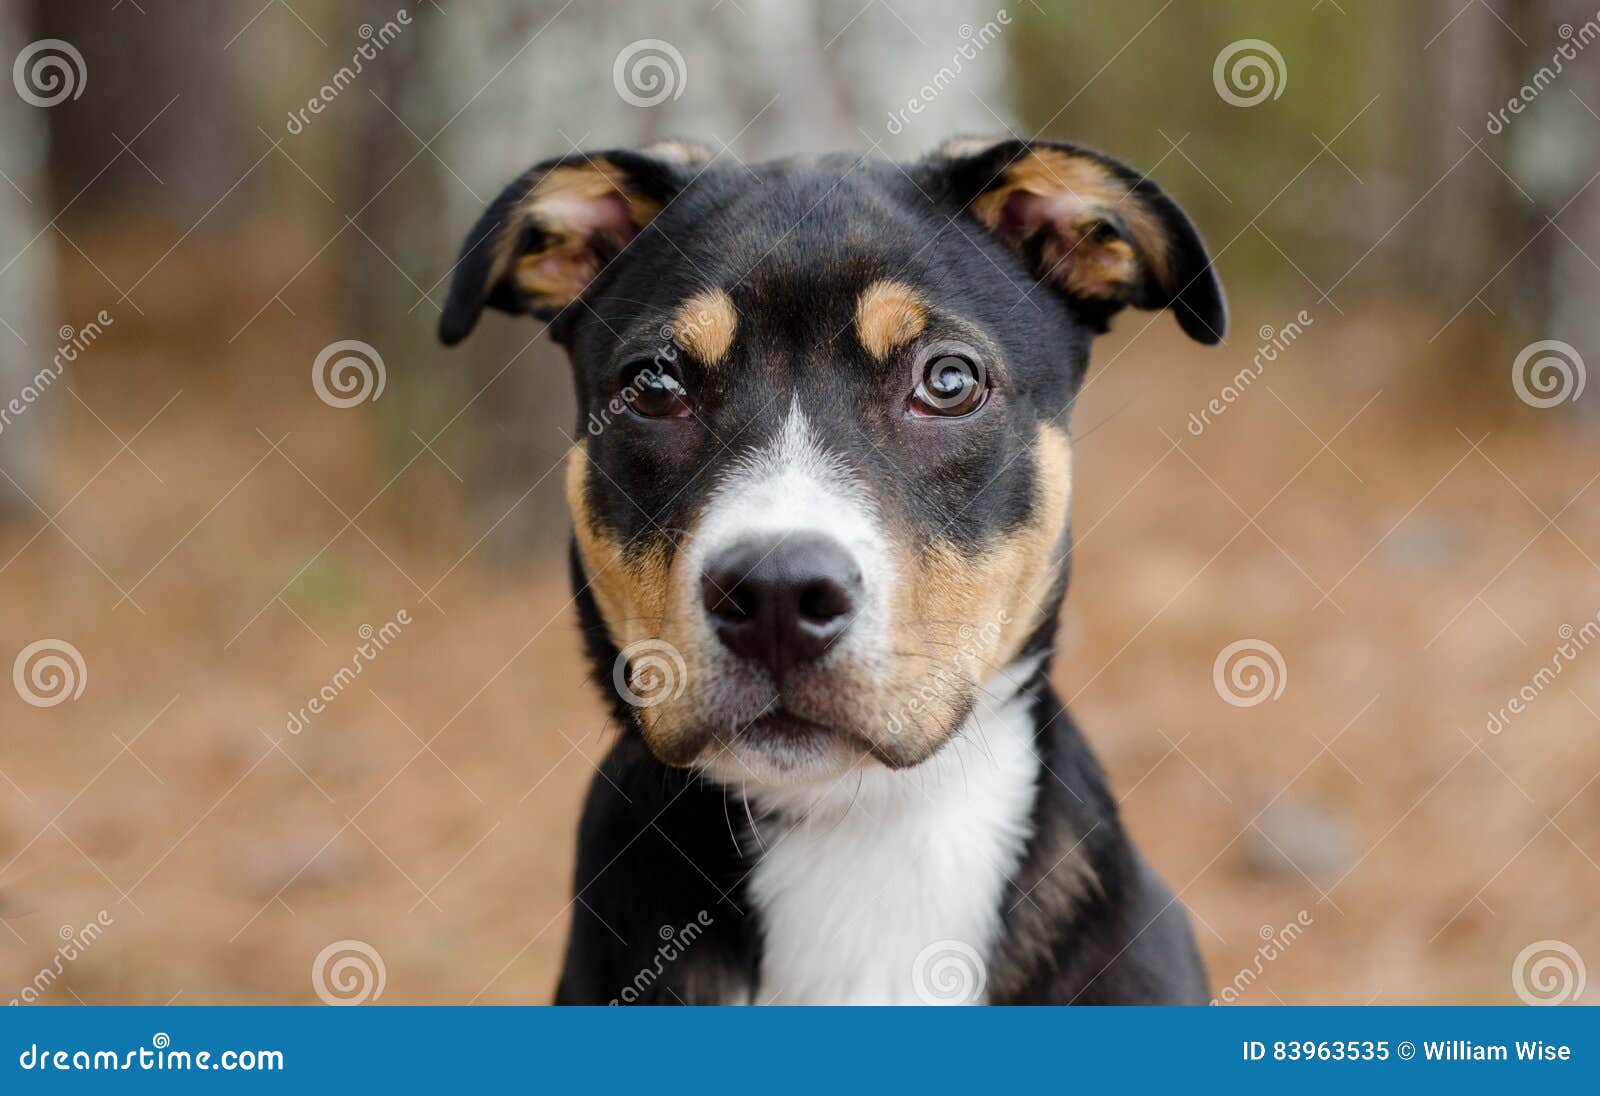 Tri-color puppy dog stock image. Image of animal, fluffy - 83963535